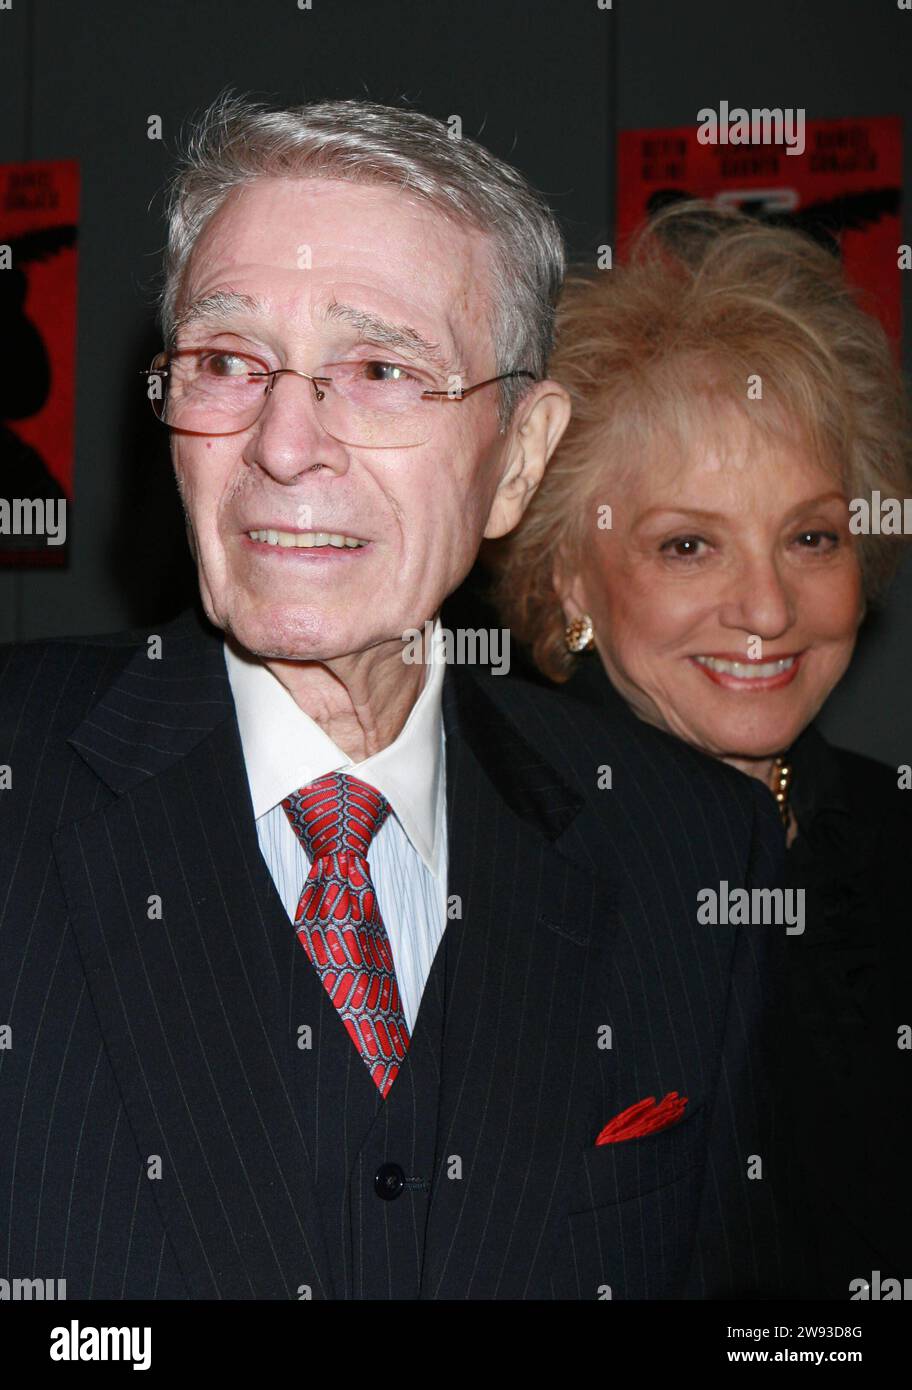 **FILE PHOTO** Selma Archerd Has Passed Away. Army Archerd and Selma Archerd attend the opening night performance of the new production of Cyrano de Bergerac at the Richard Rogers Theatre in New York City on November 1, 2007. Photo Copyright: xHenryxMcGeex Stock Photo